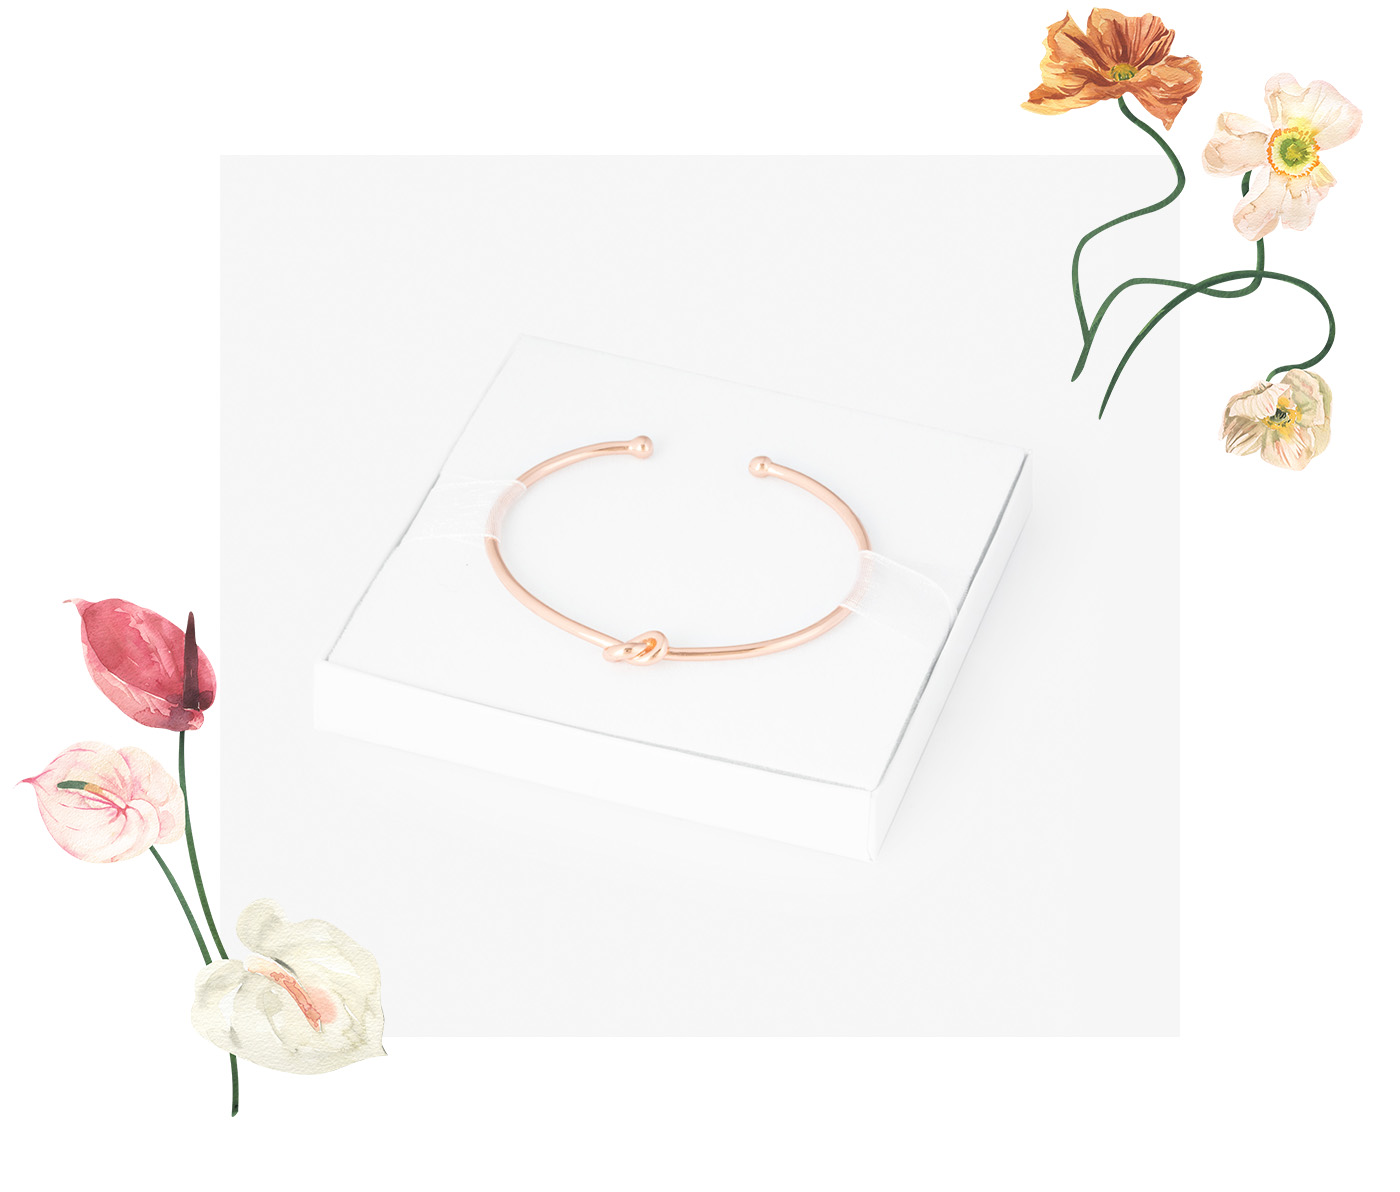 Rose Gold Knot Bangle with floral decoration in pinks, creams and oranges